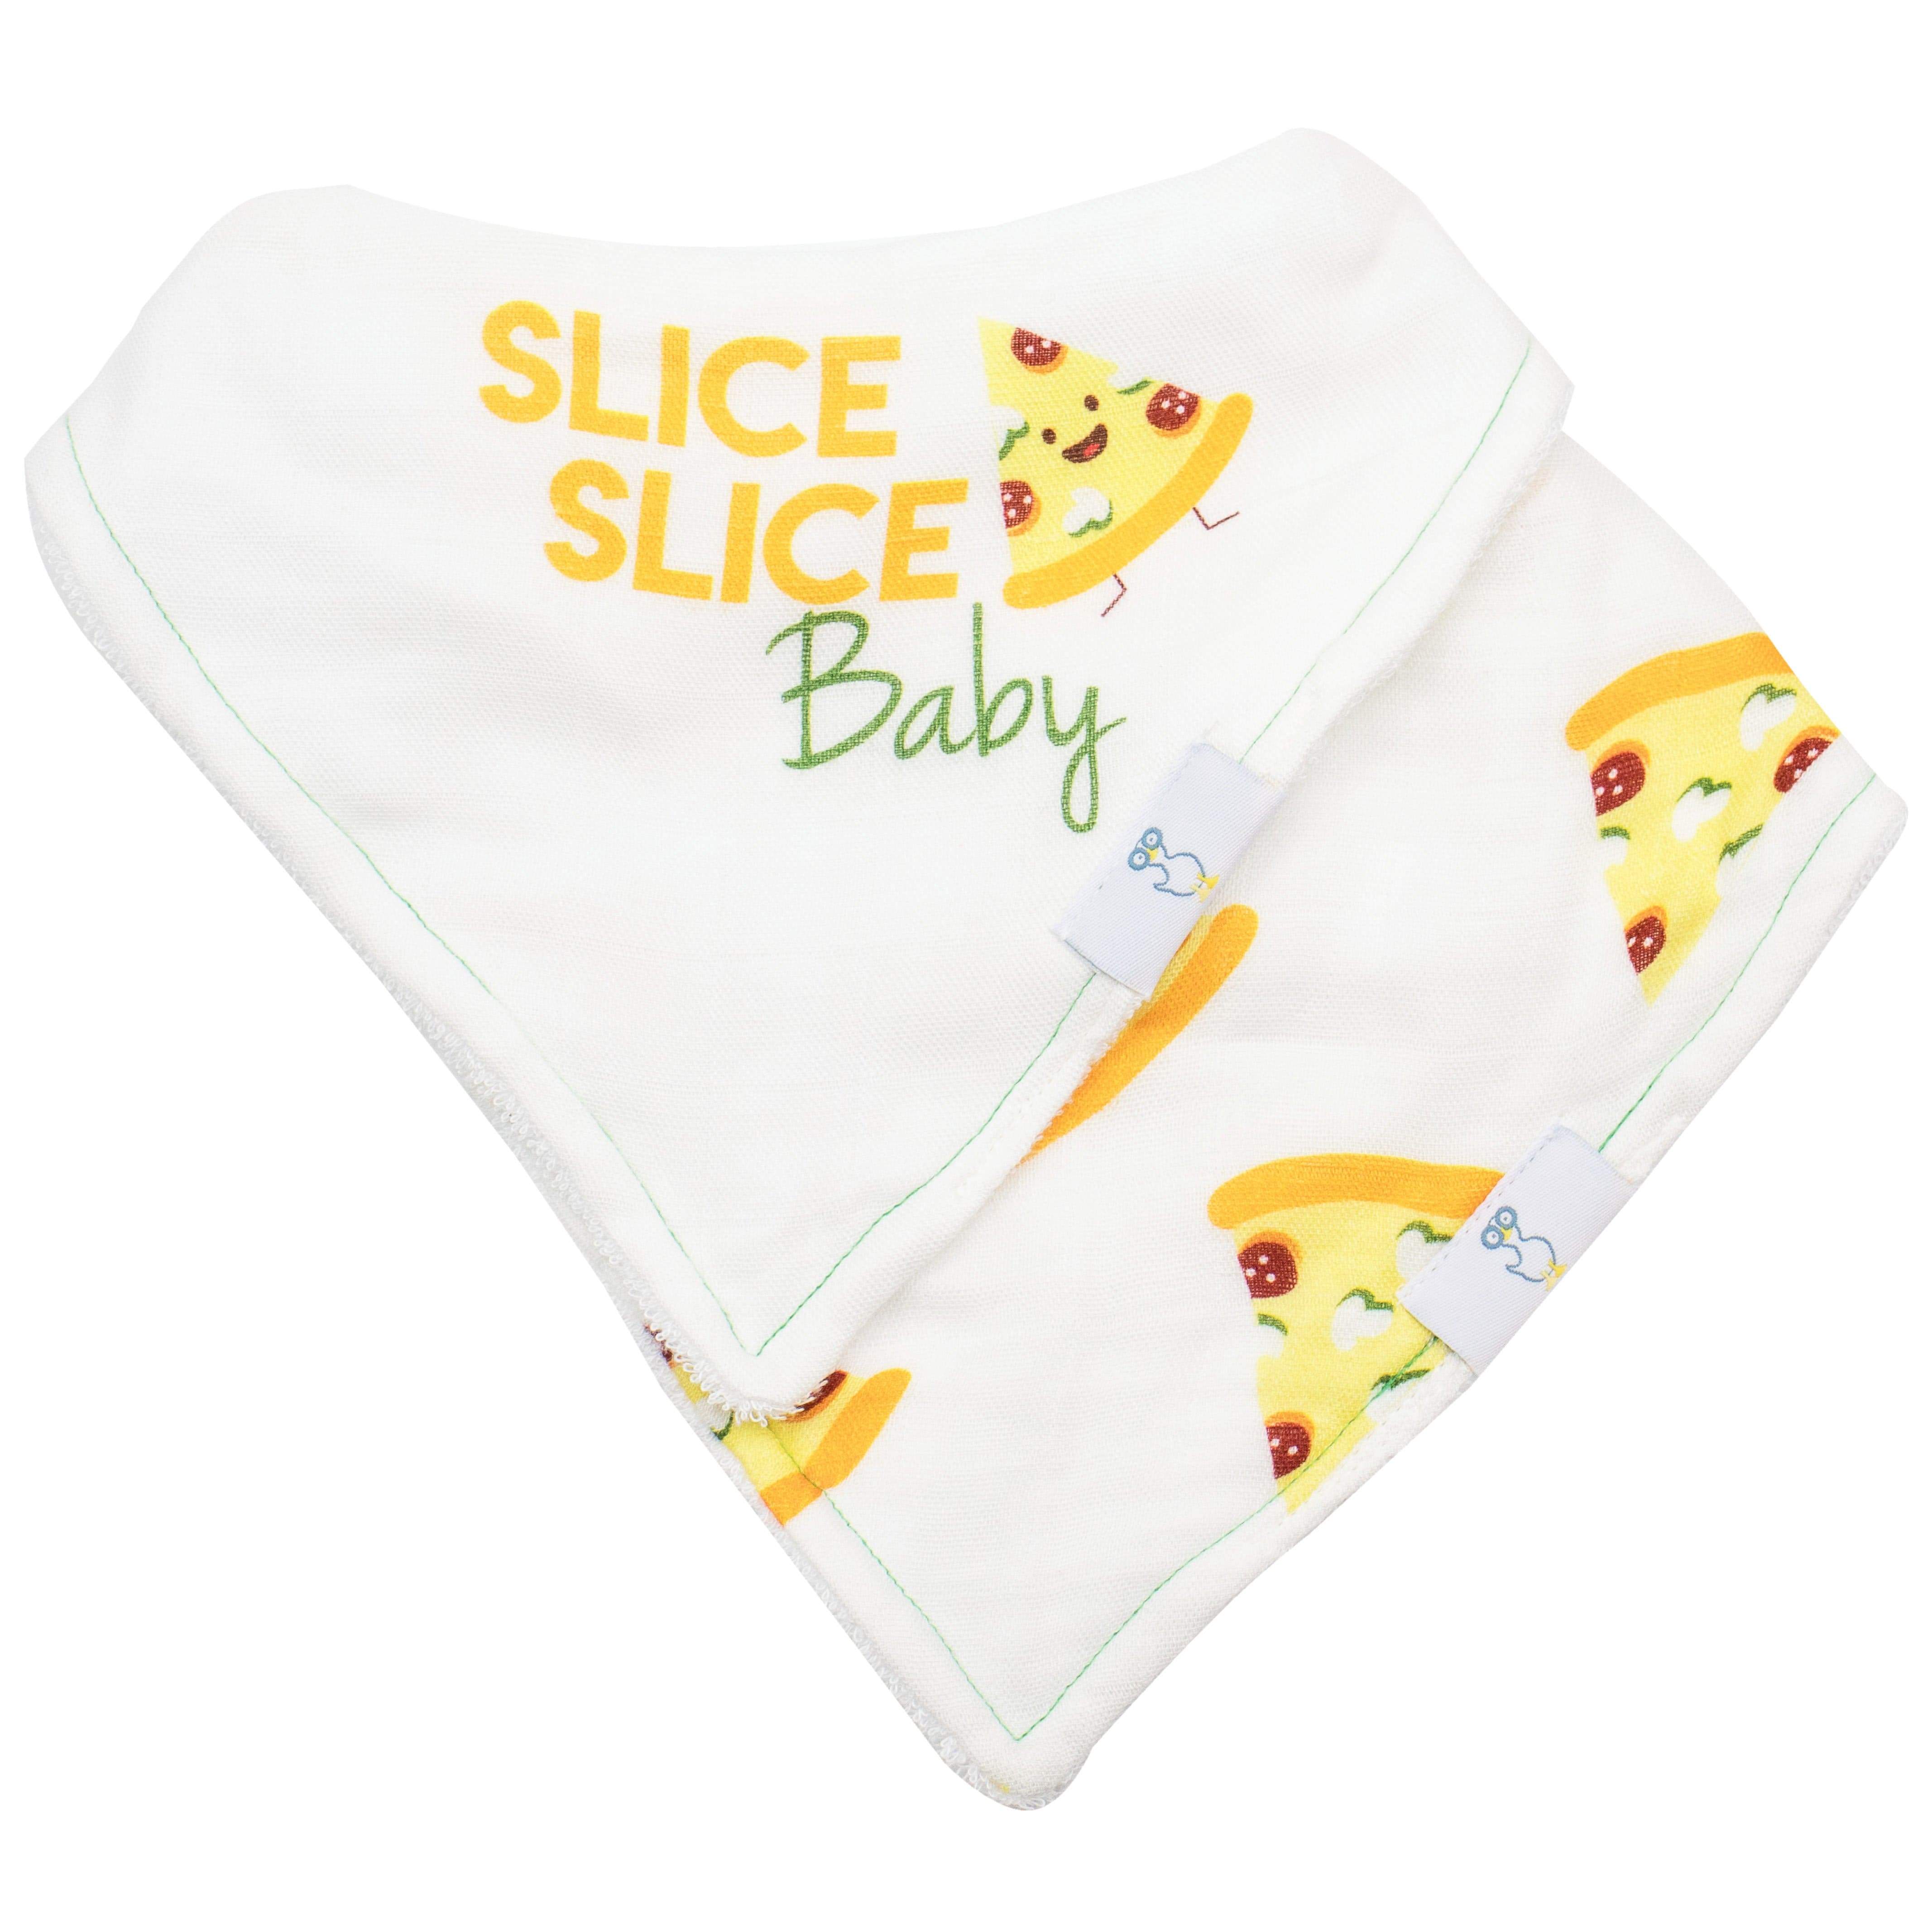 Slice Slice Baby And Pizza 2 Pack Muslin & Terry Cloth Bib Set